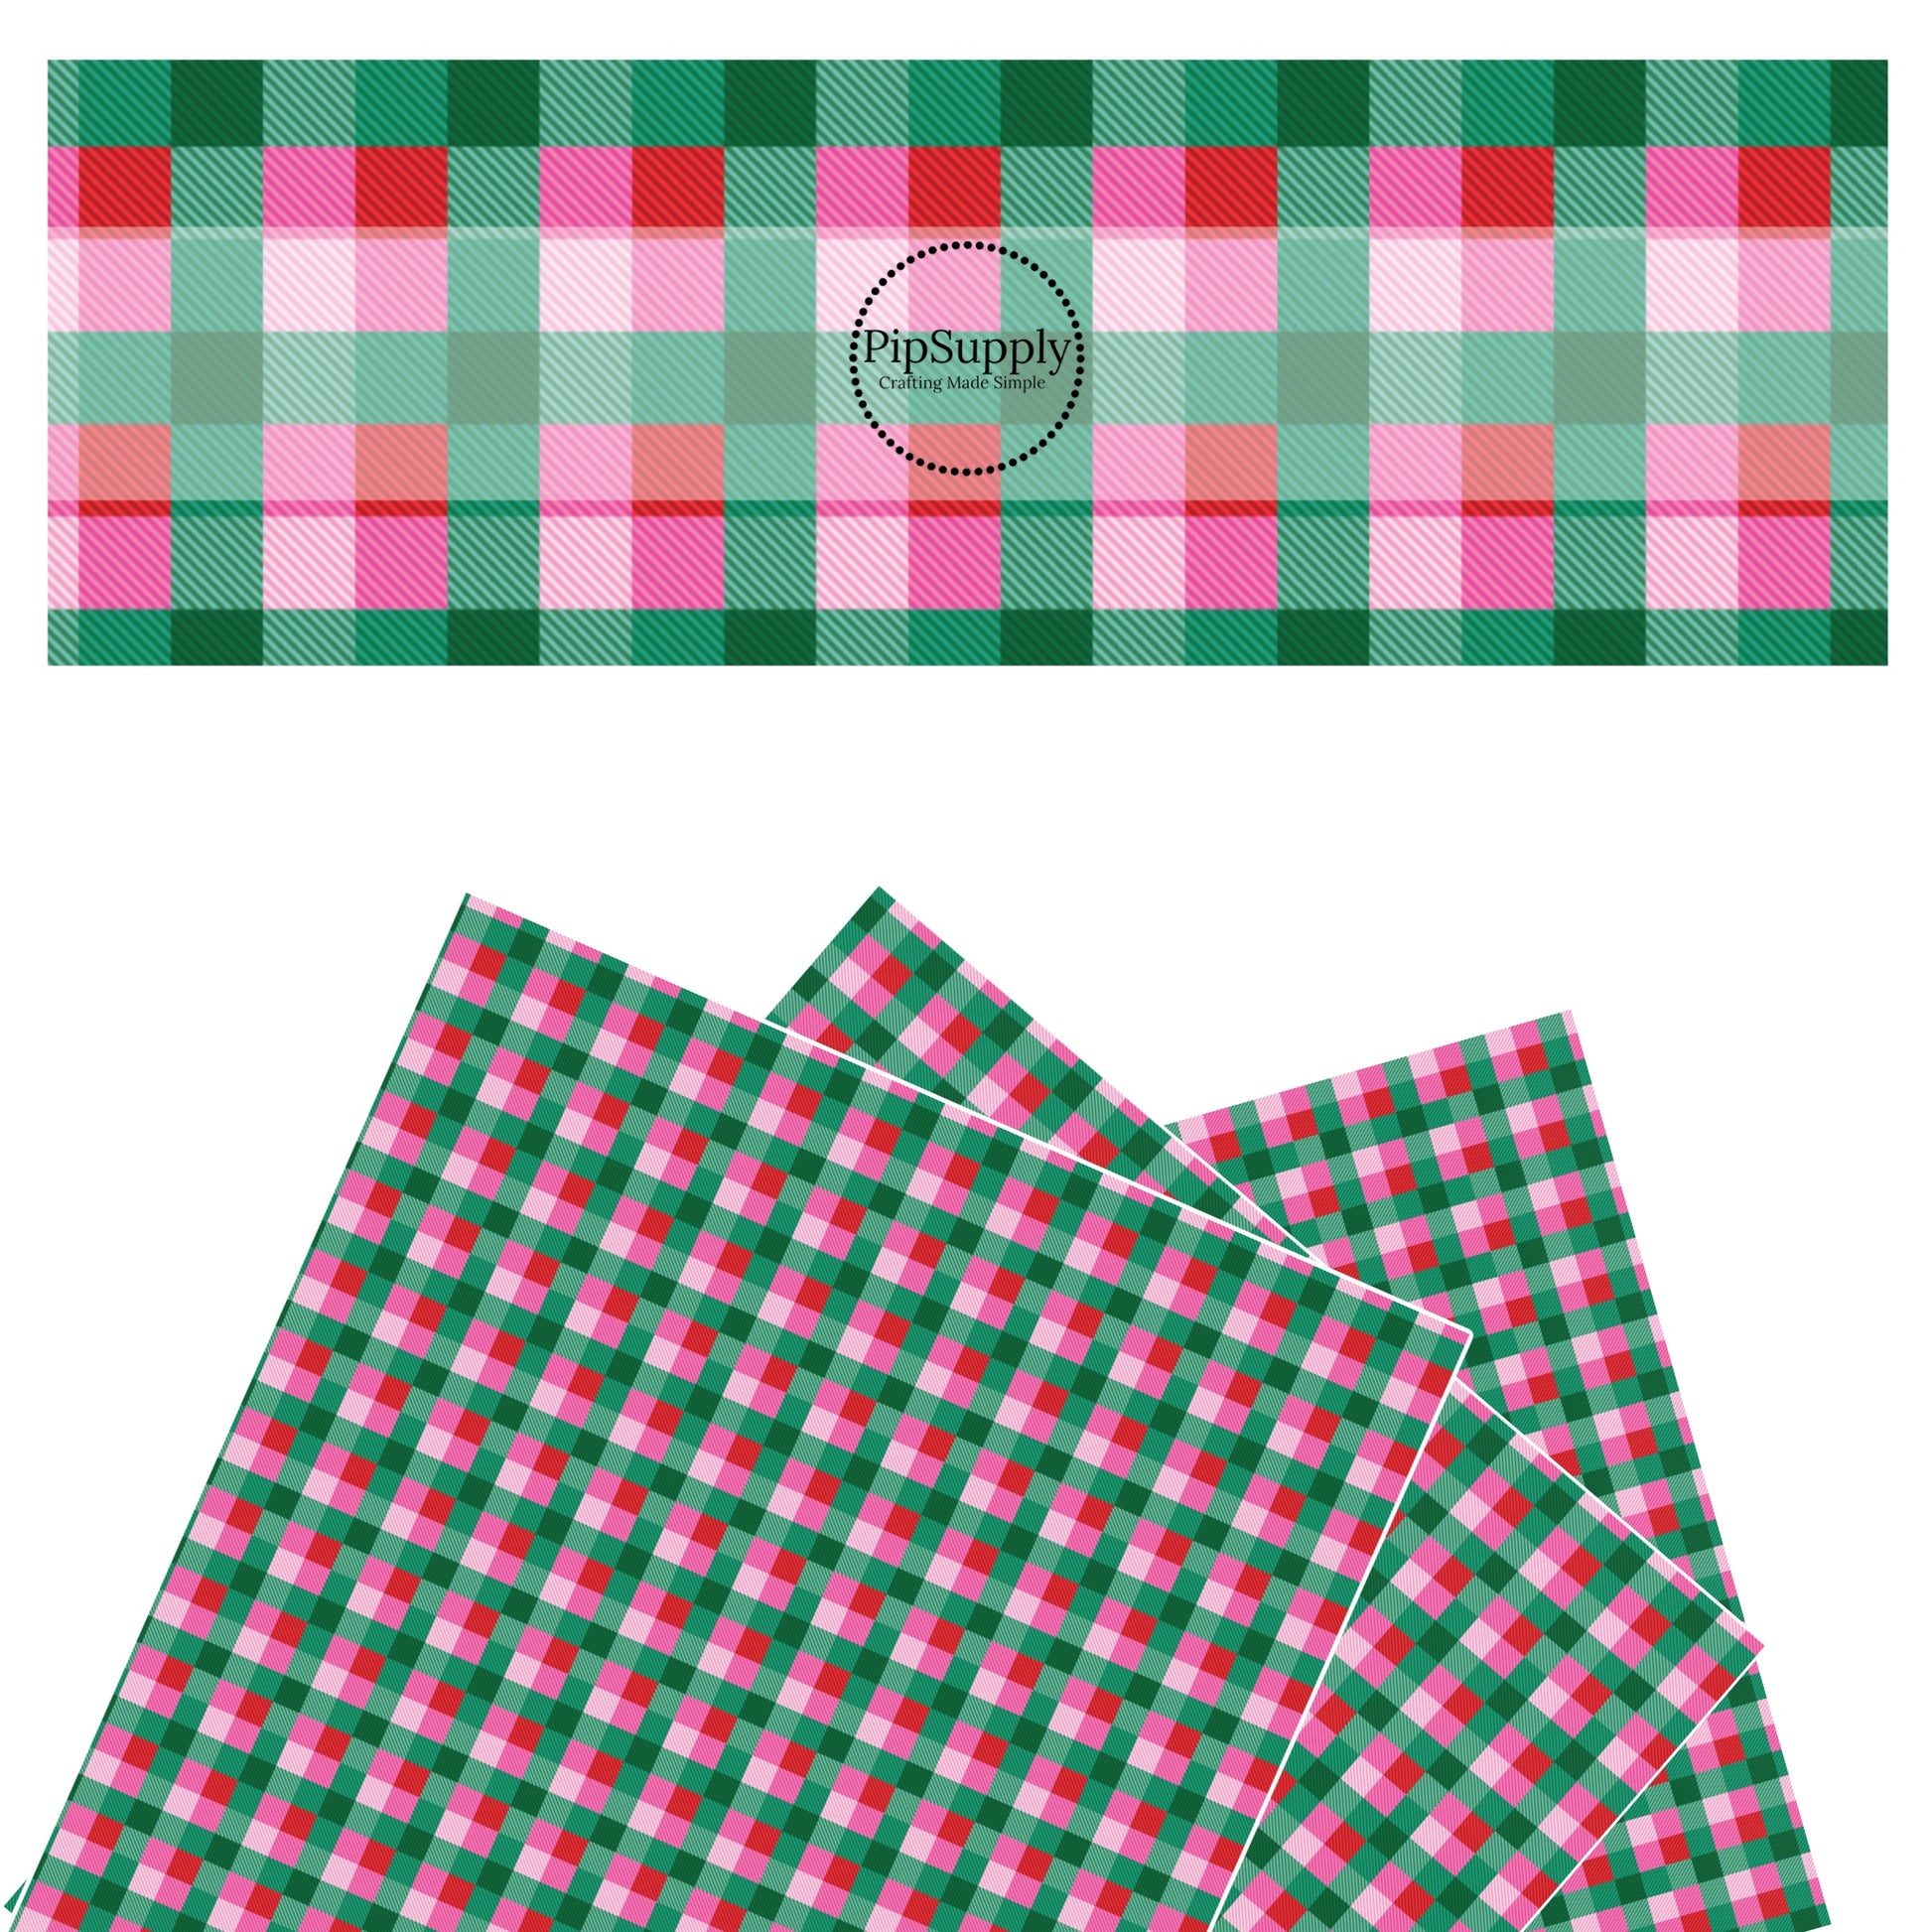 Striped multi pink and green grid faux leather sheets